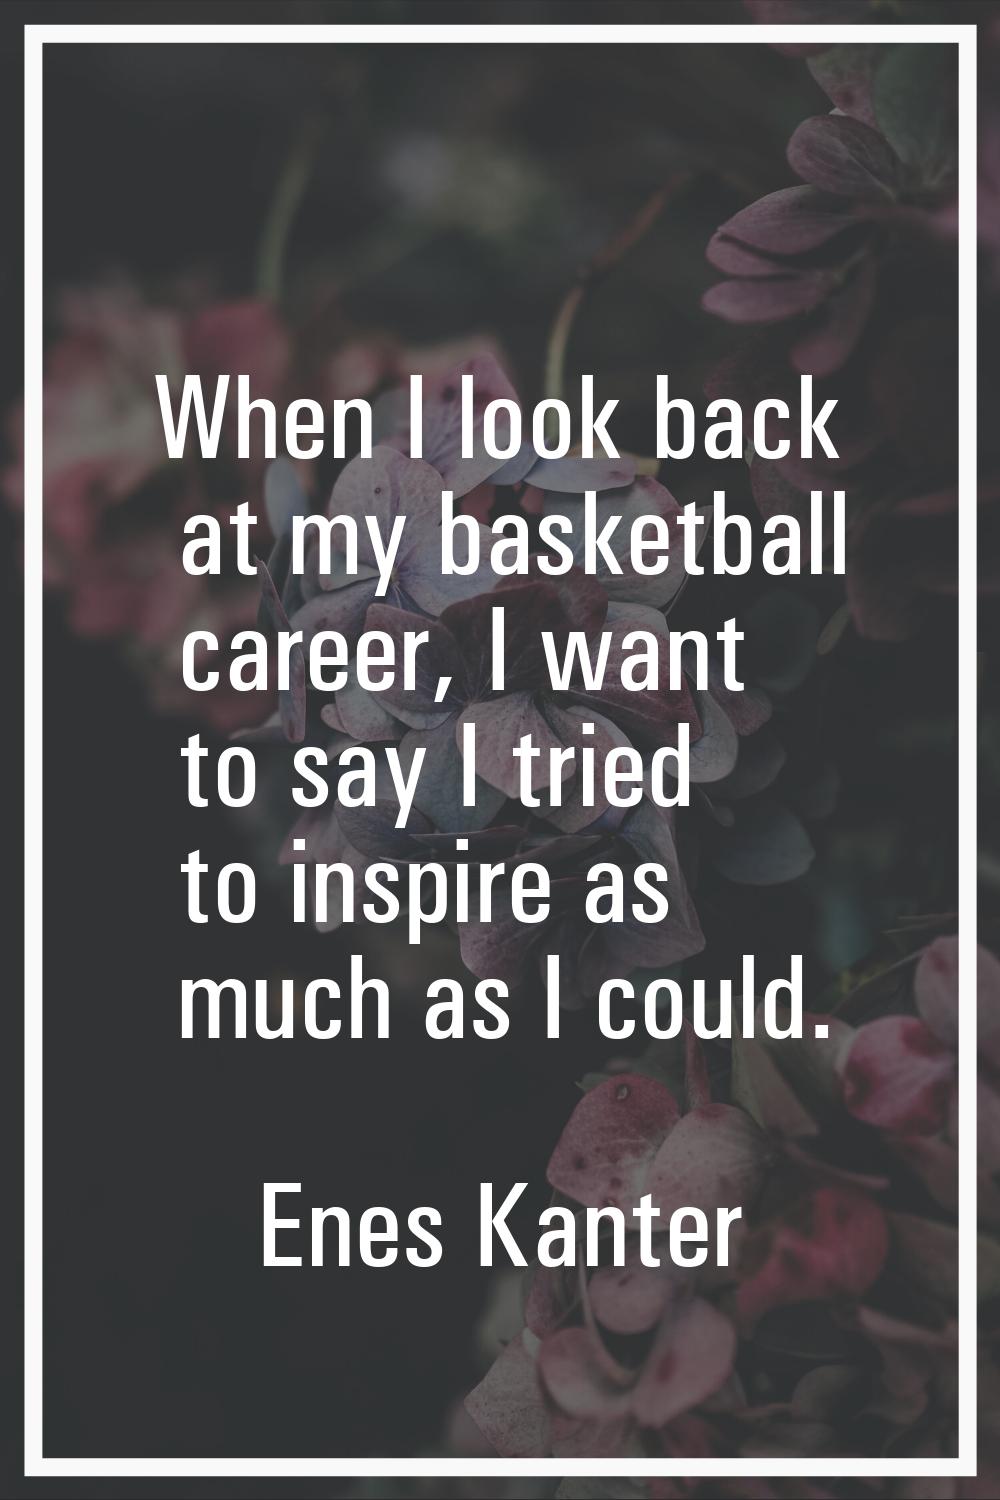 When I look back at my basketball career, I want to say I tried to inspire as much as I could.